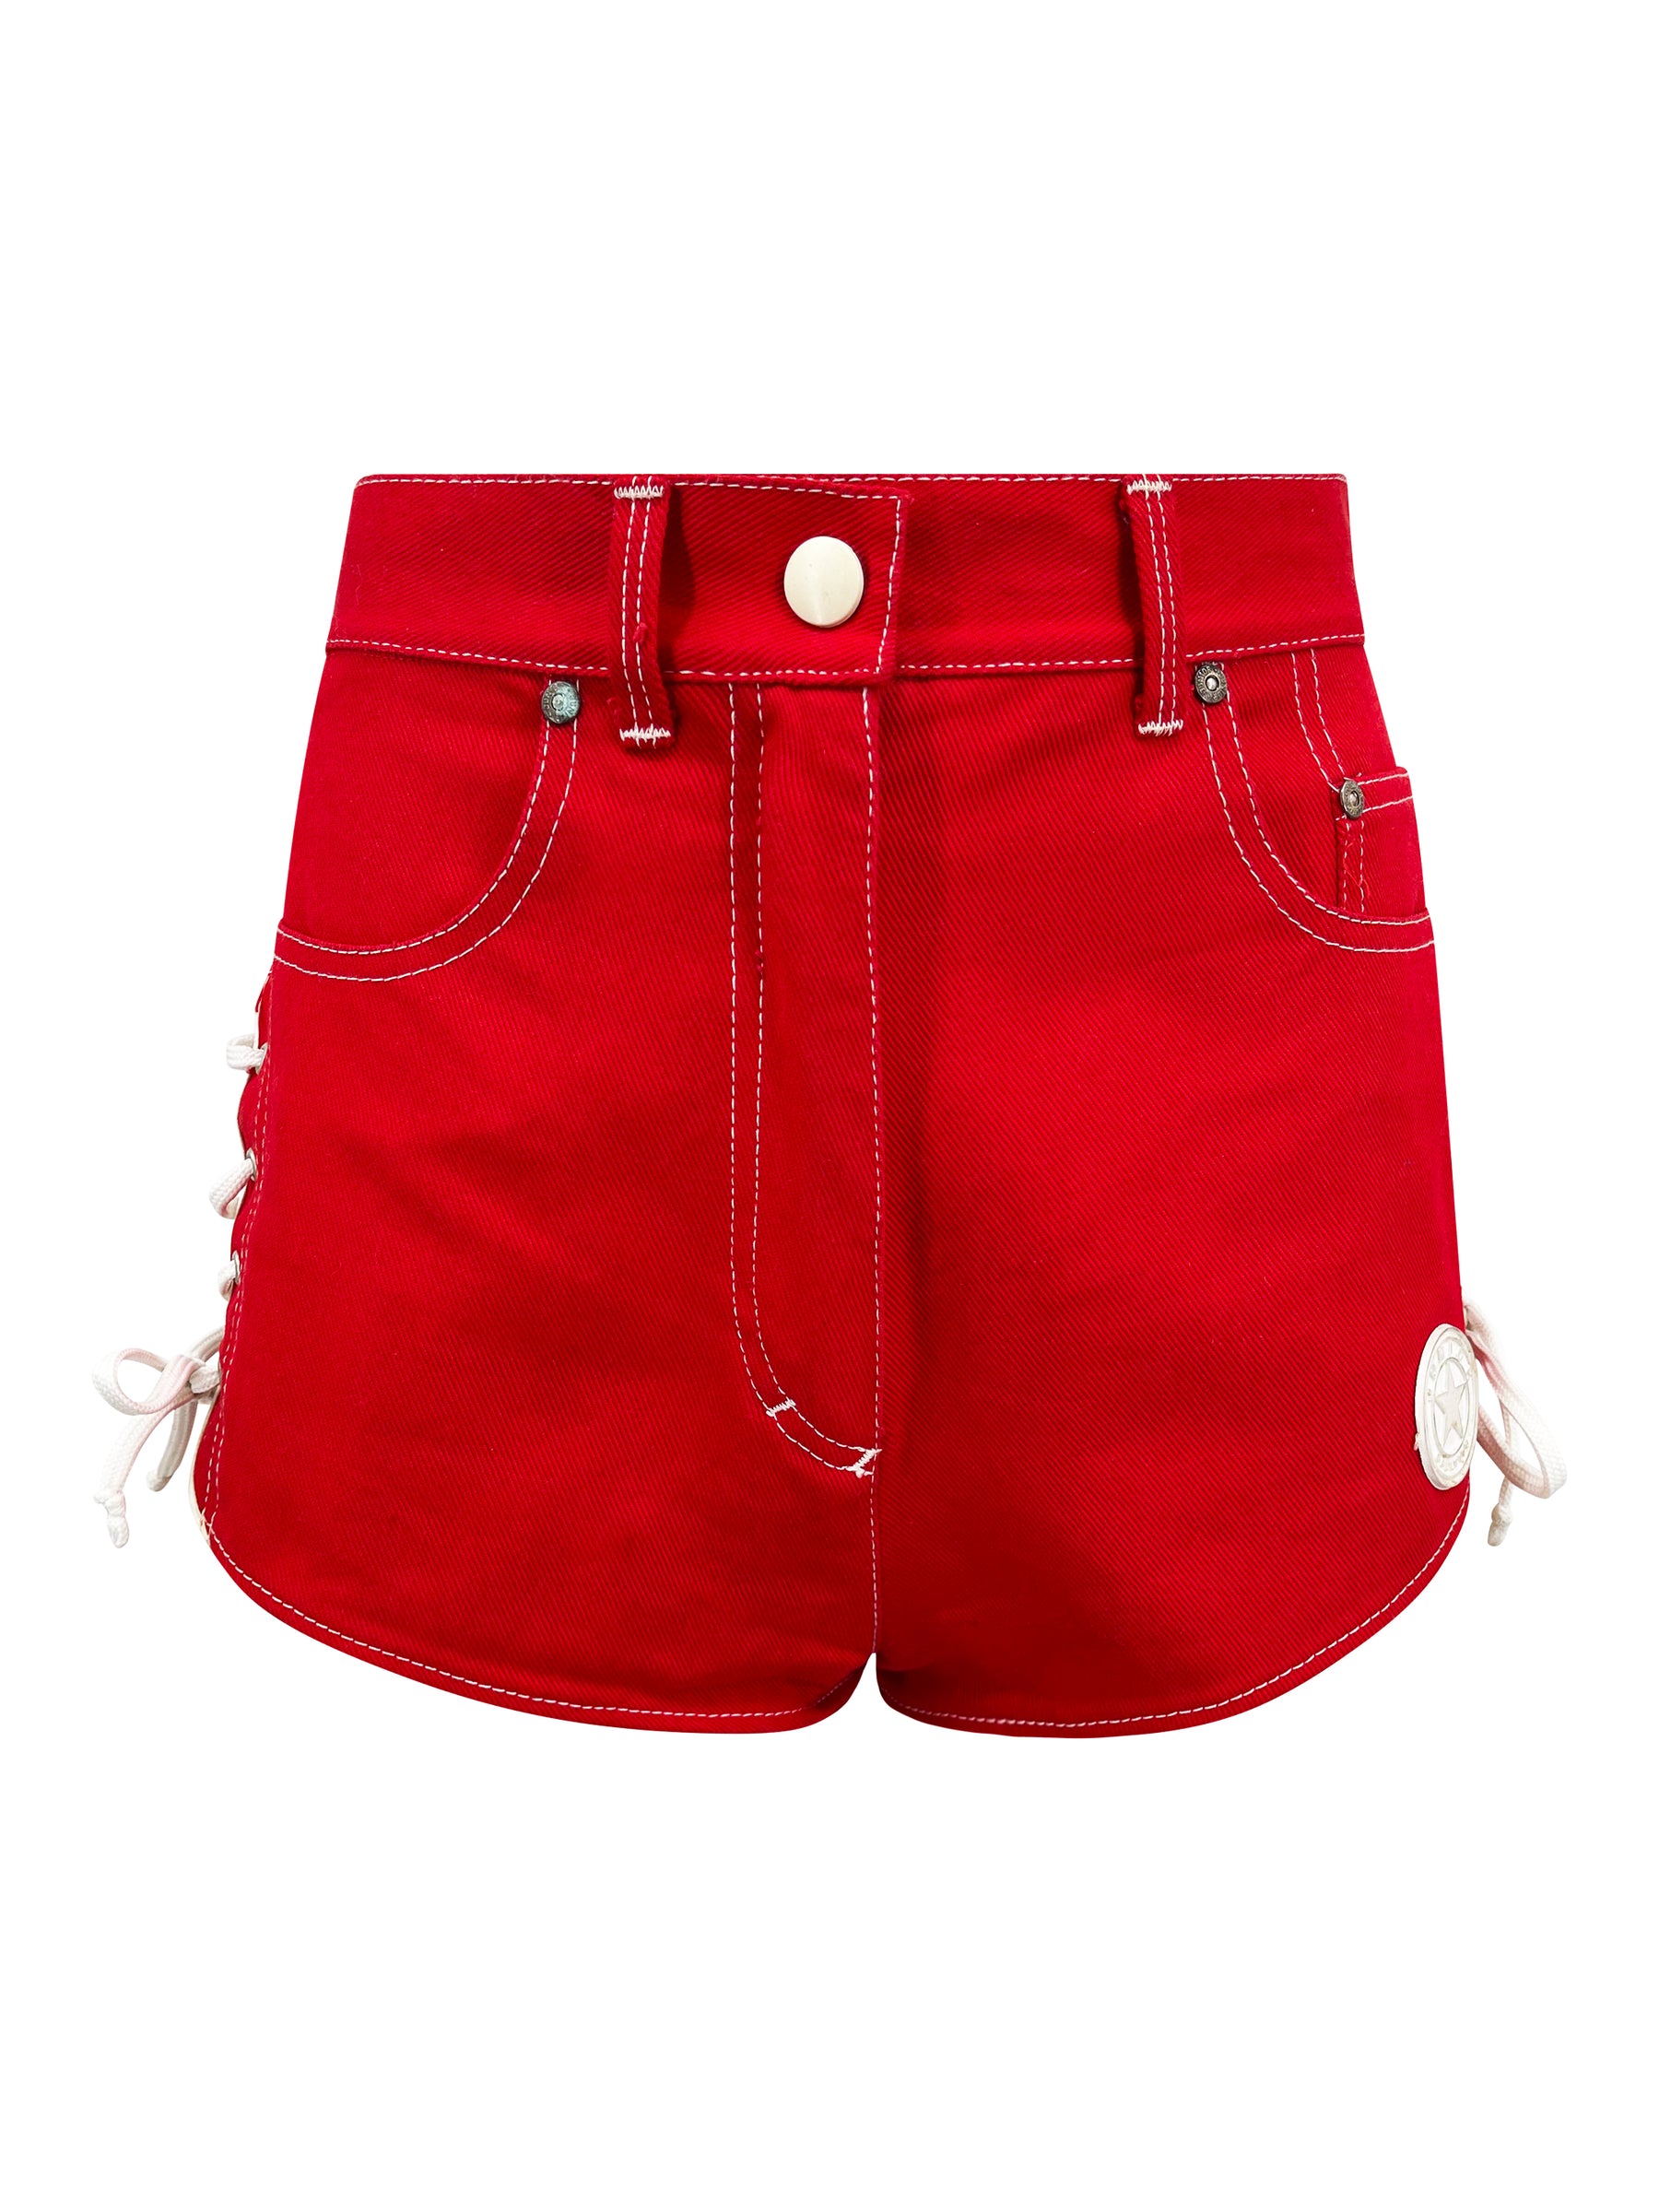 90s Jean Paul Gaultier Red Mini Short - ONFEMME By Lindsey's Kloset